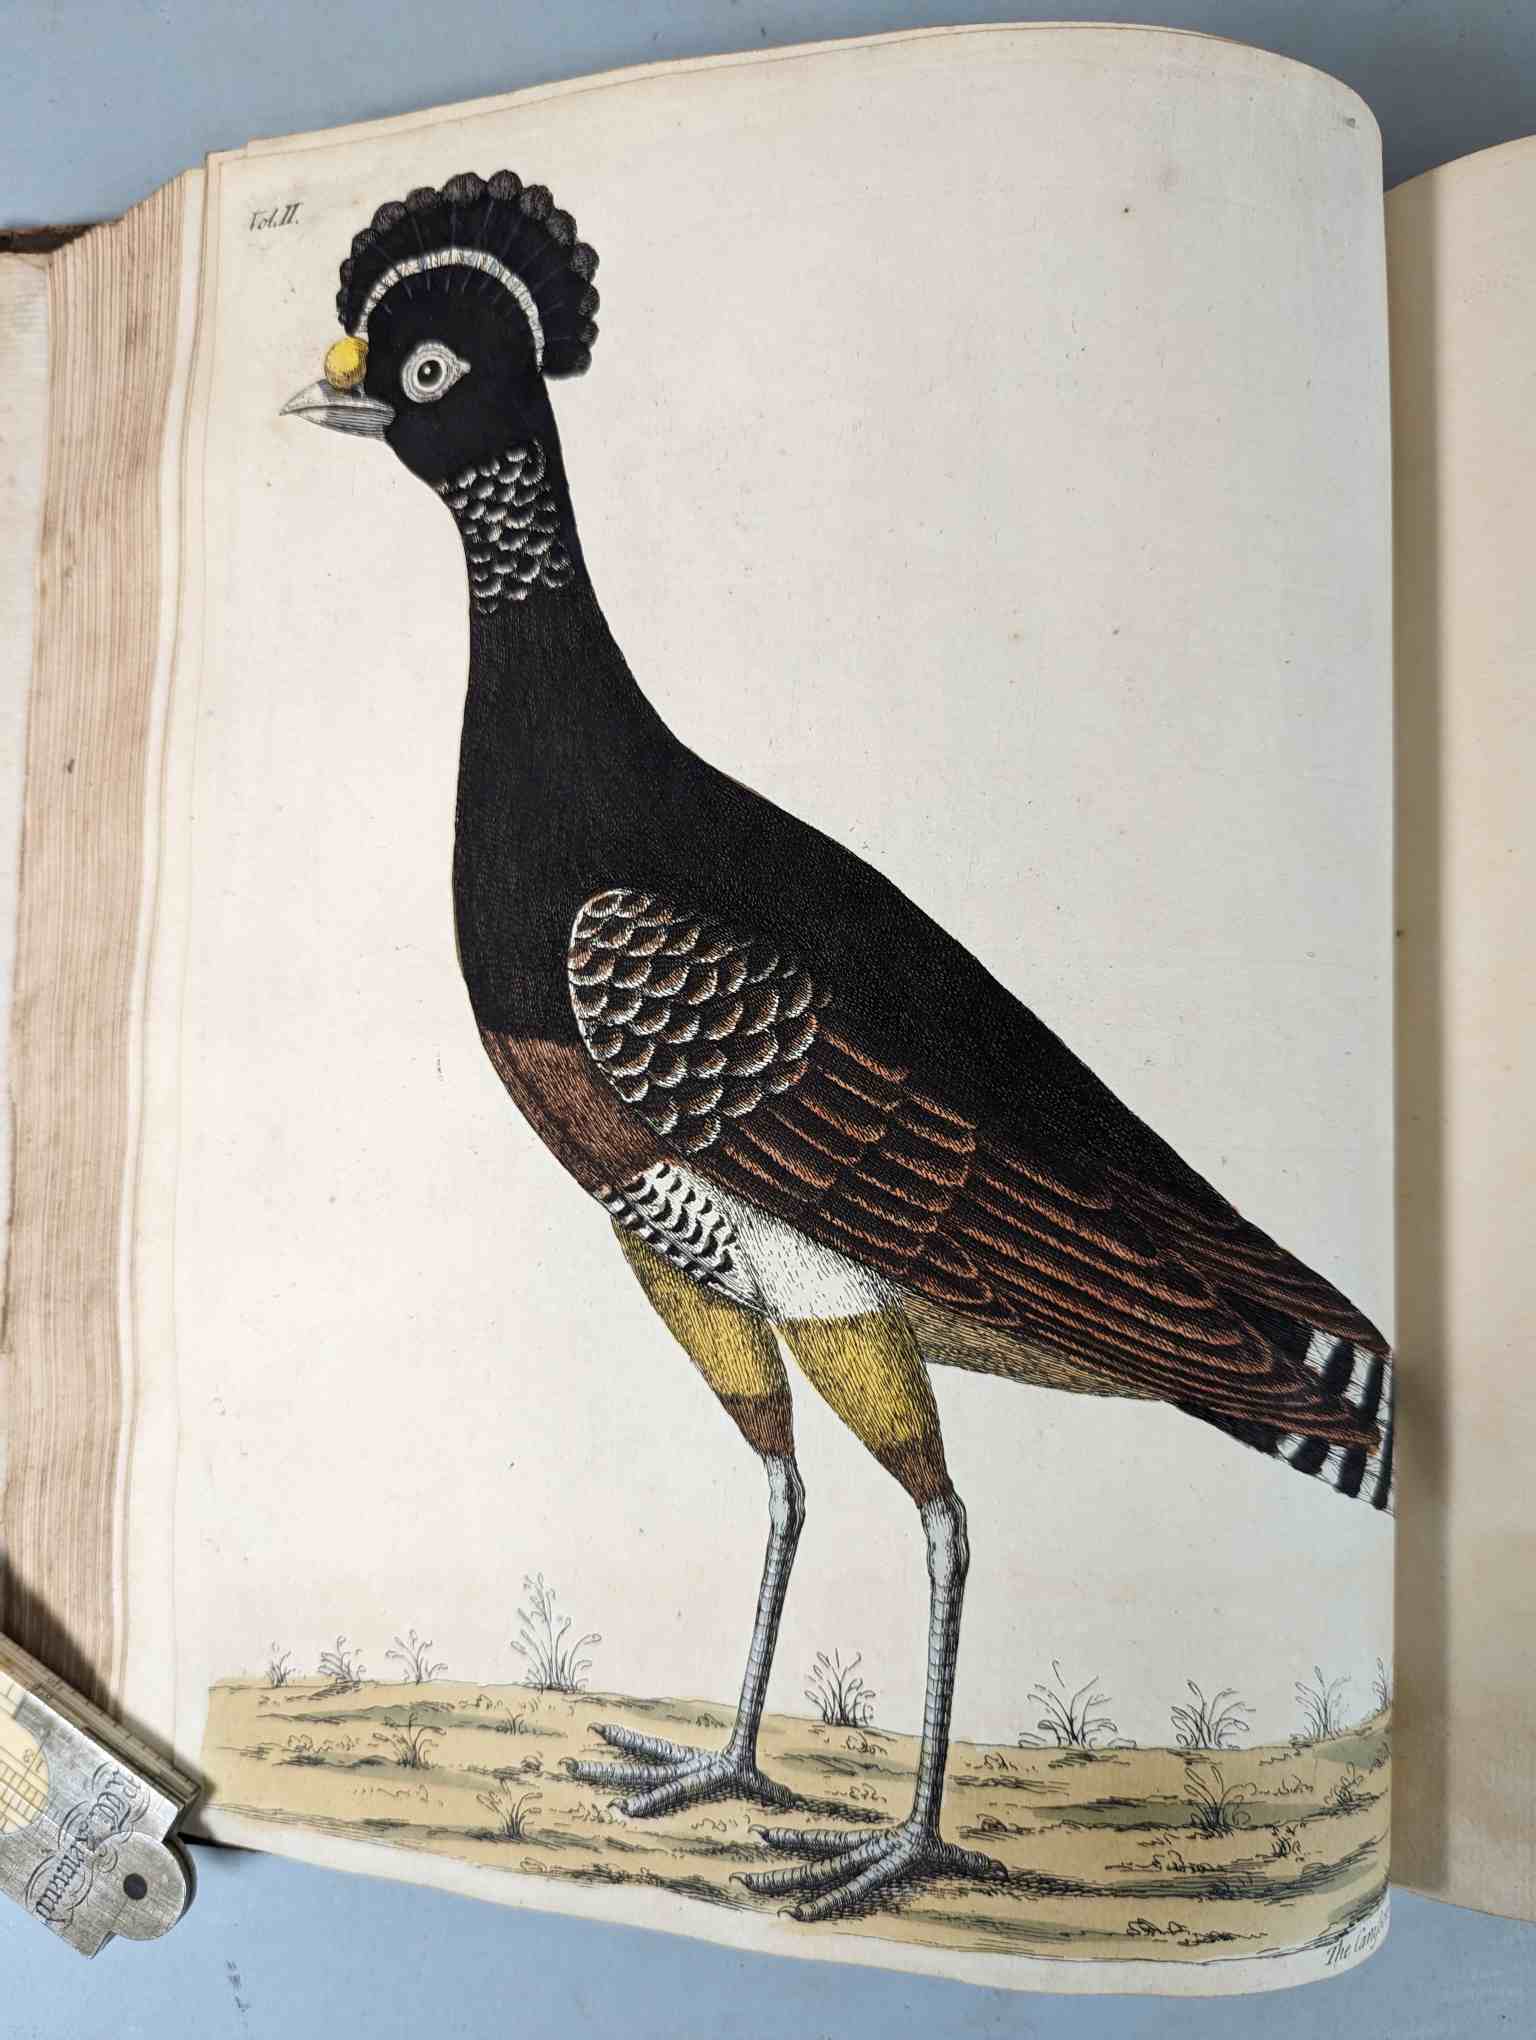 ALBIN, Eleazar. A Natural History of Birds, to which are added, Notes and Observations by W. - Image 135 of 208